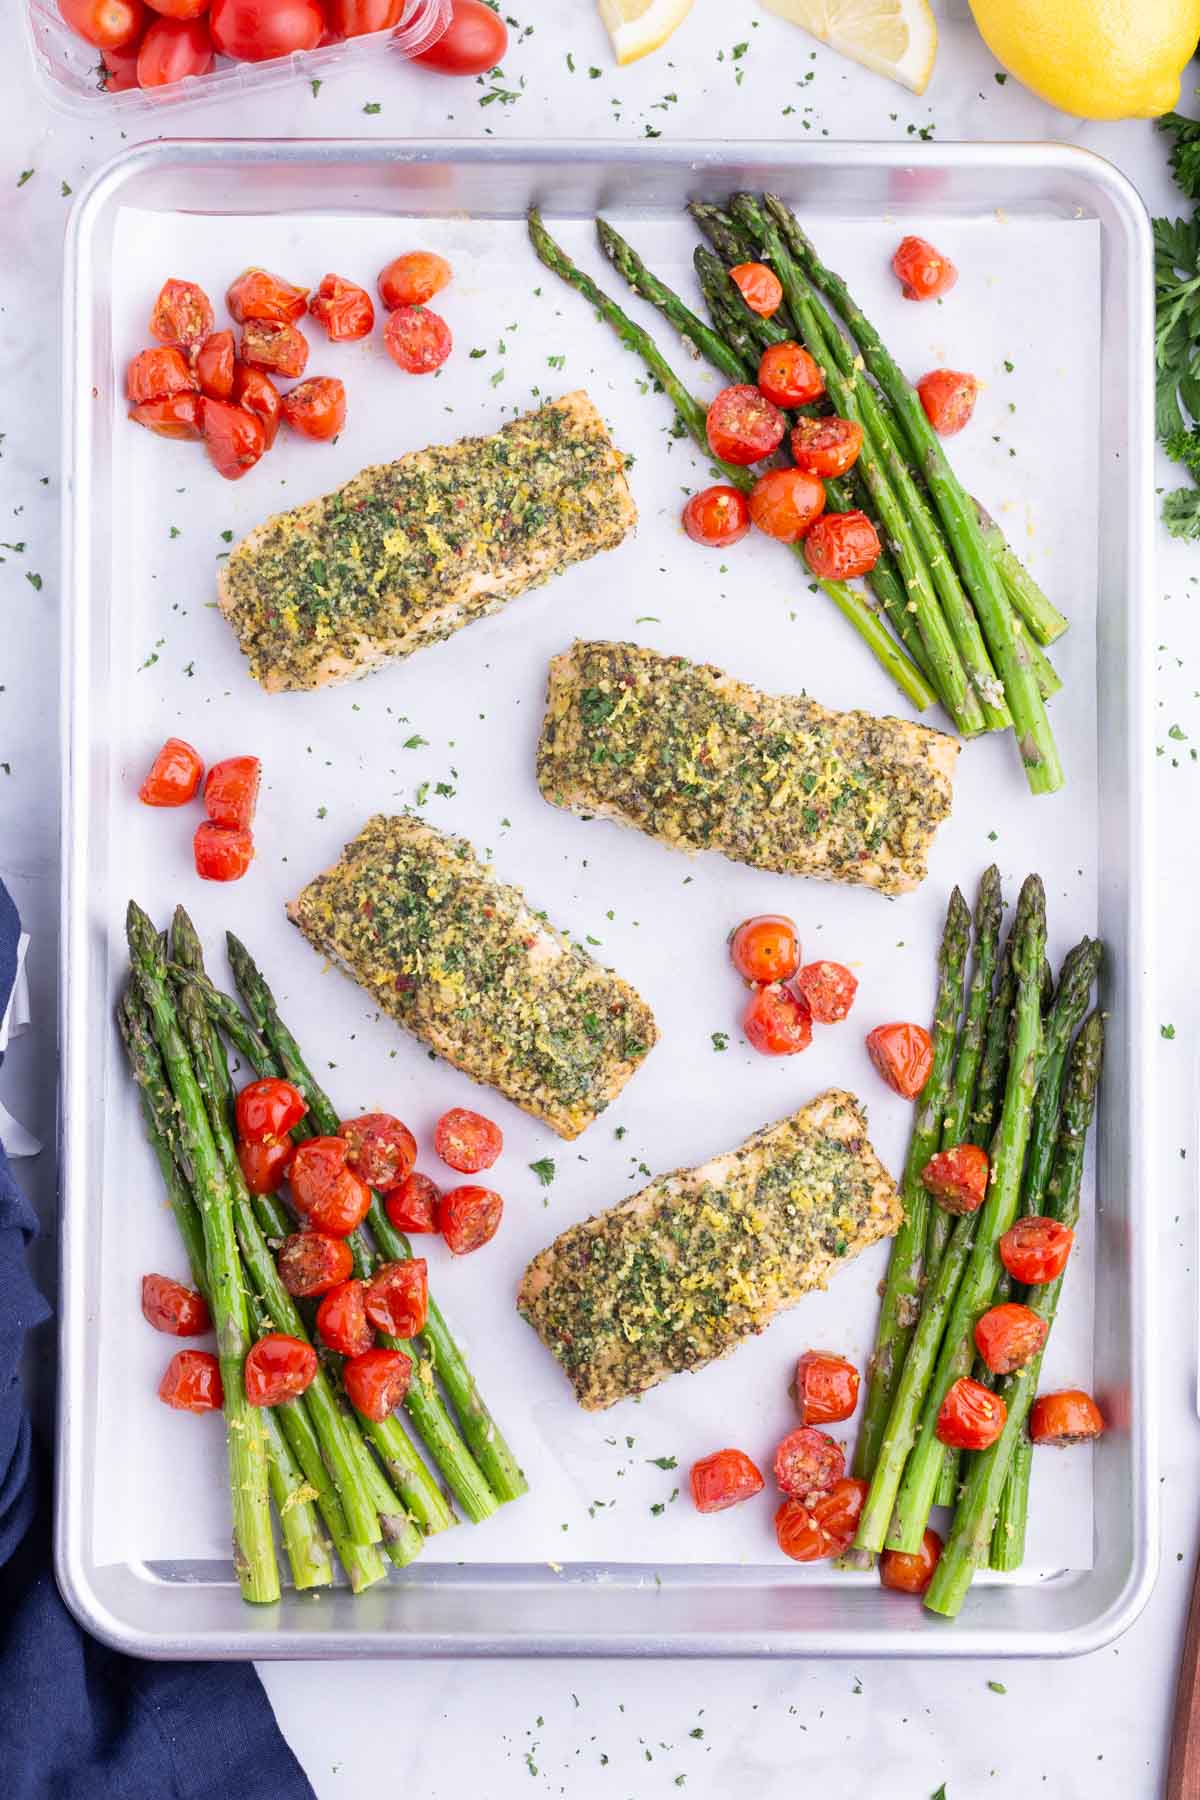 A baking sheet full of pesto salmon, roasted asparagus, and tomatoes.